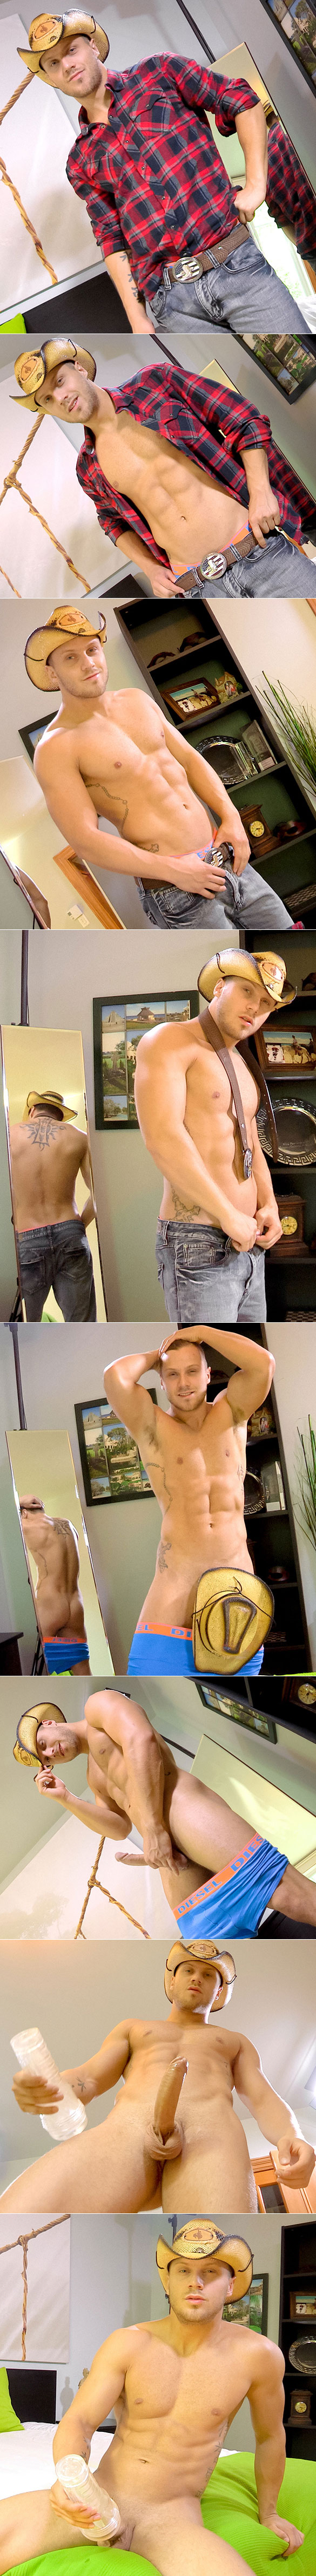 Maskurbate: Mike busts a nut in "Saddle Up Jock"